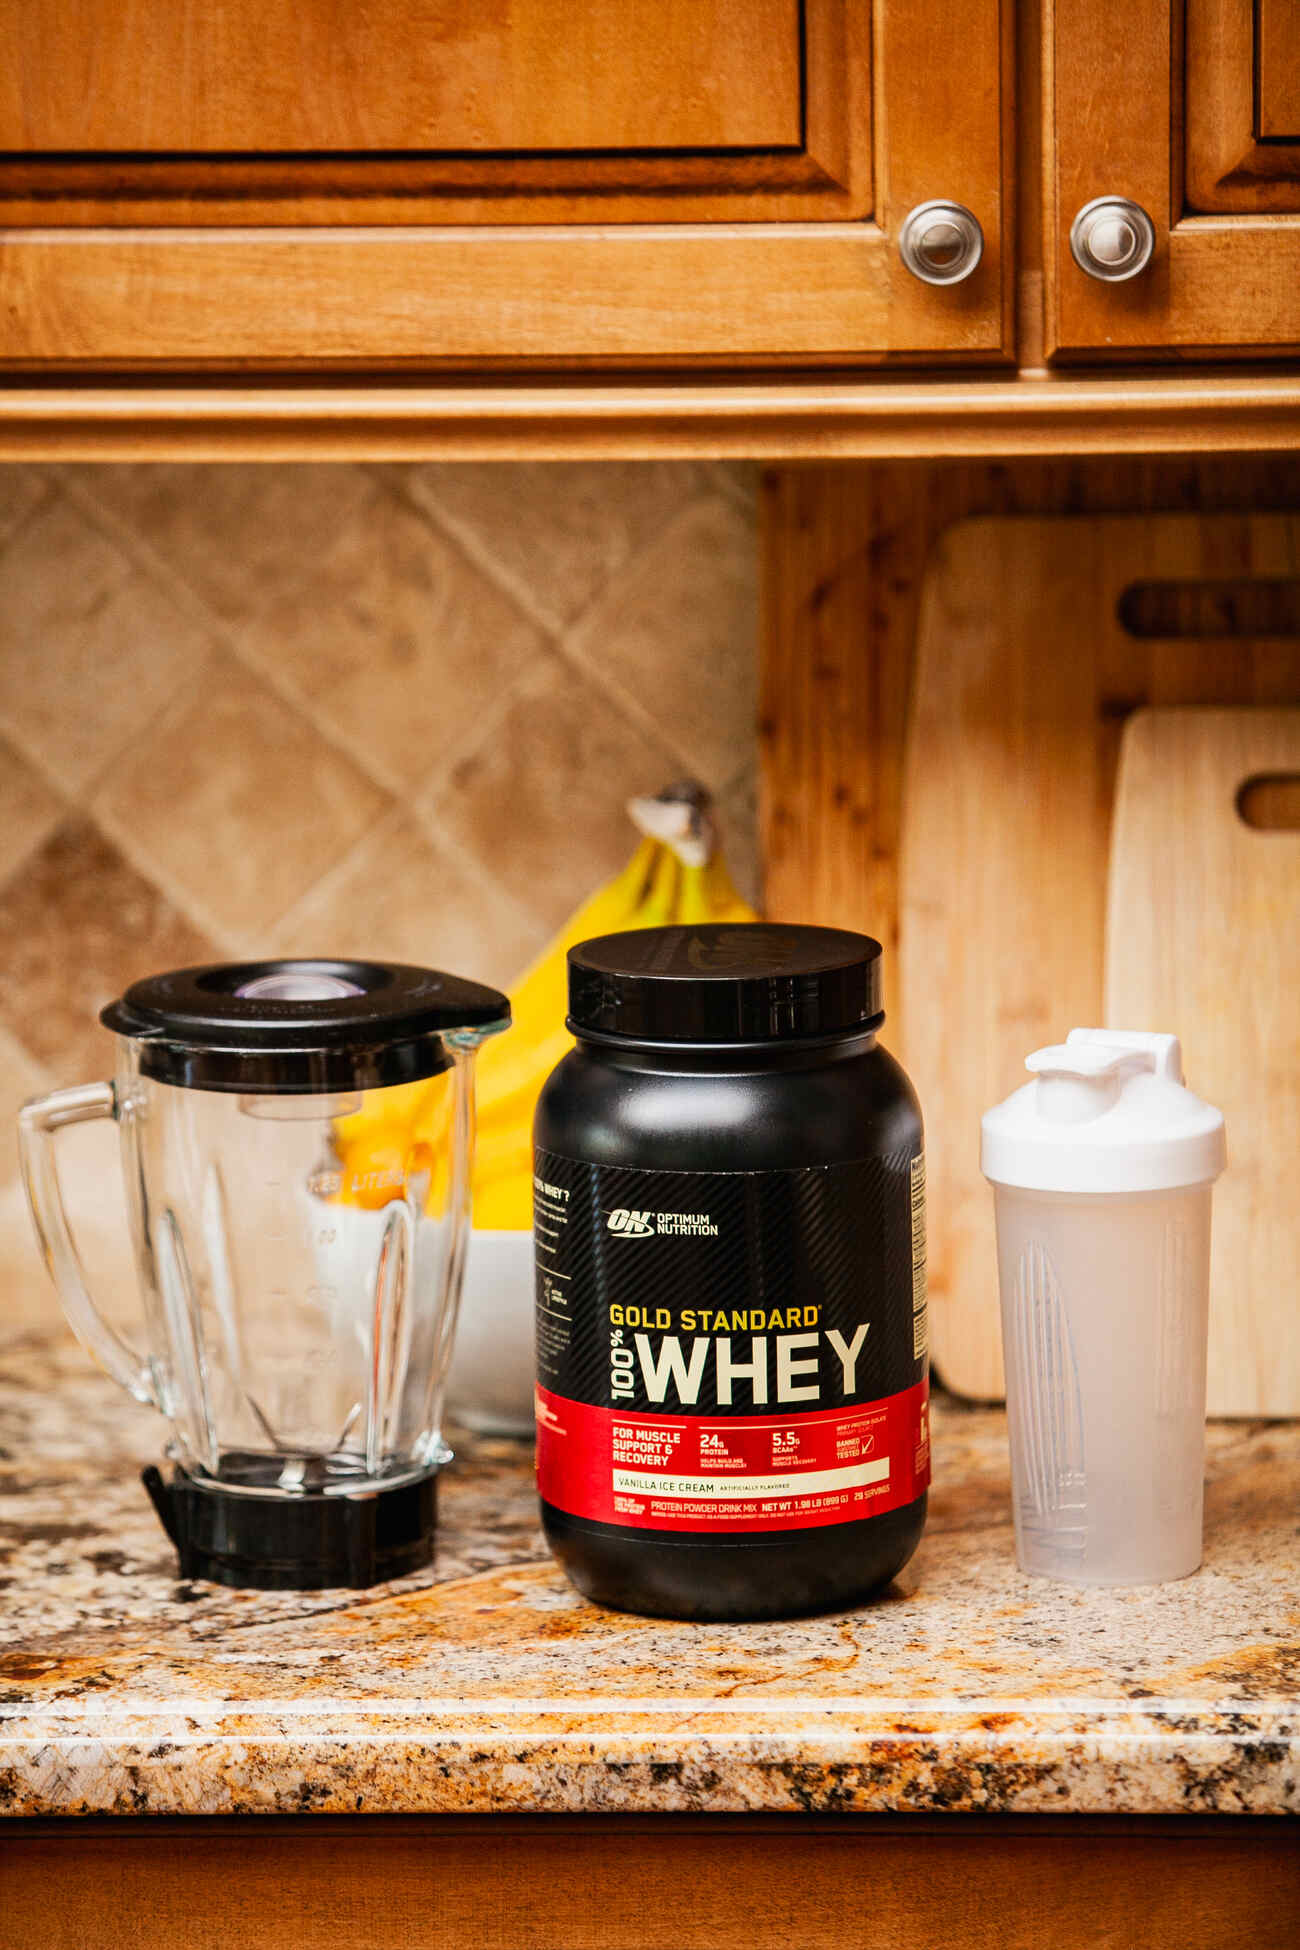 Protein powder, blender, and shaker on kitchen countertop